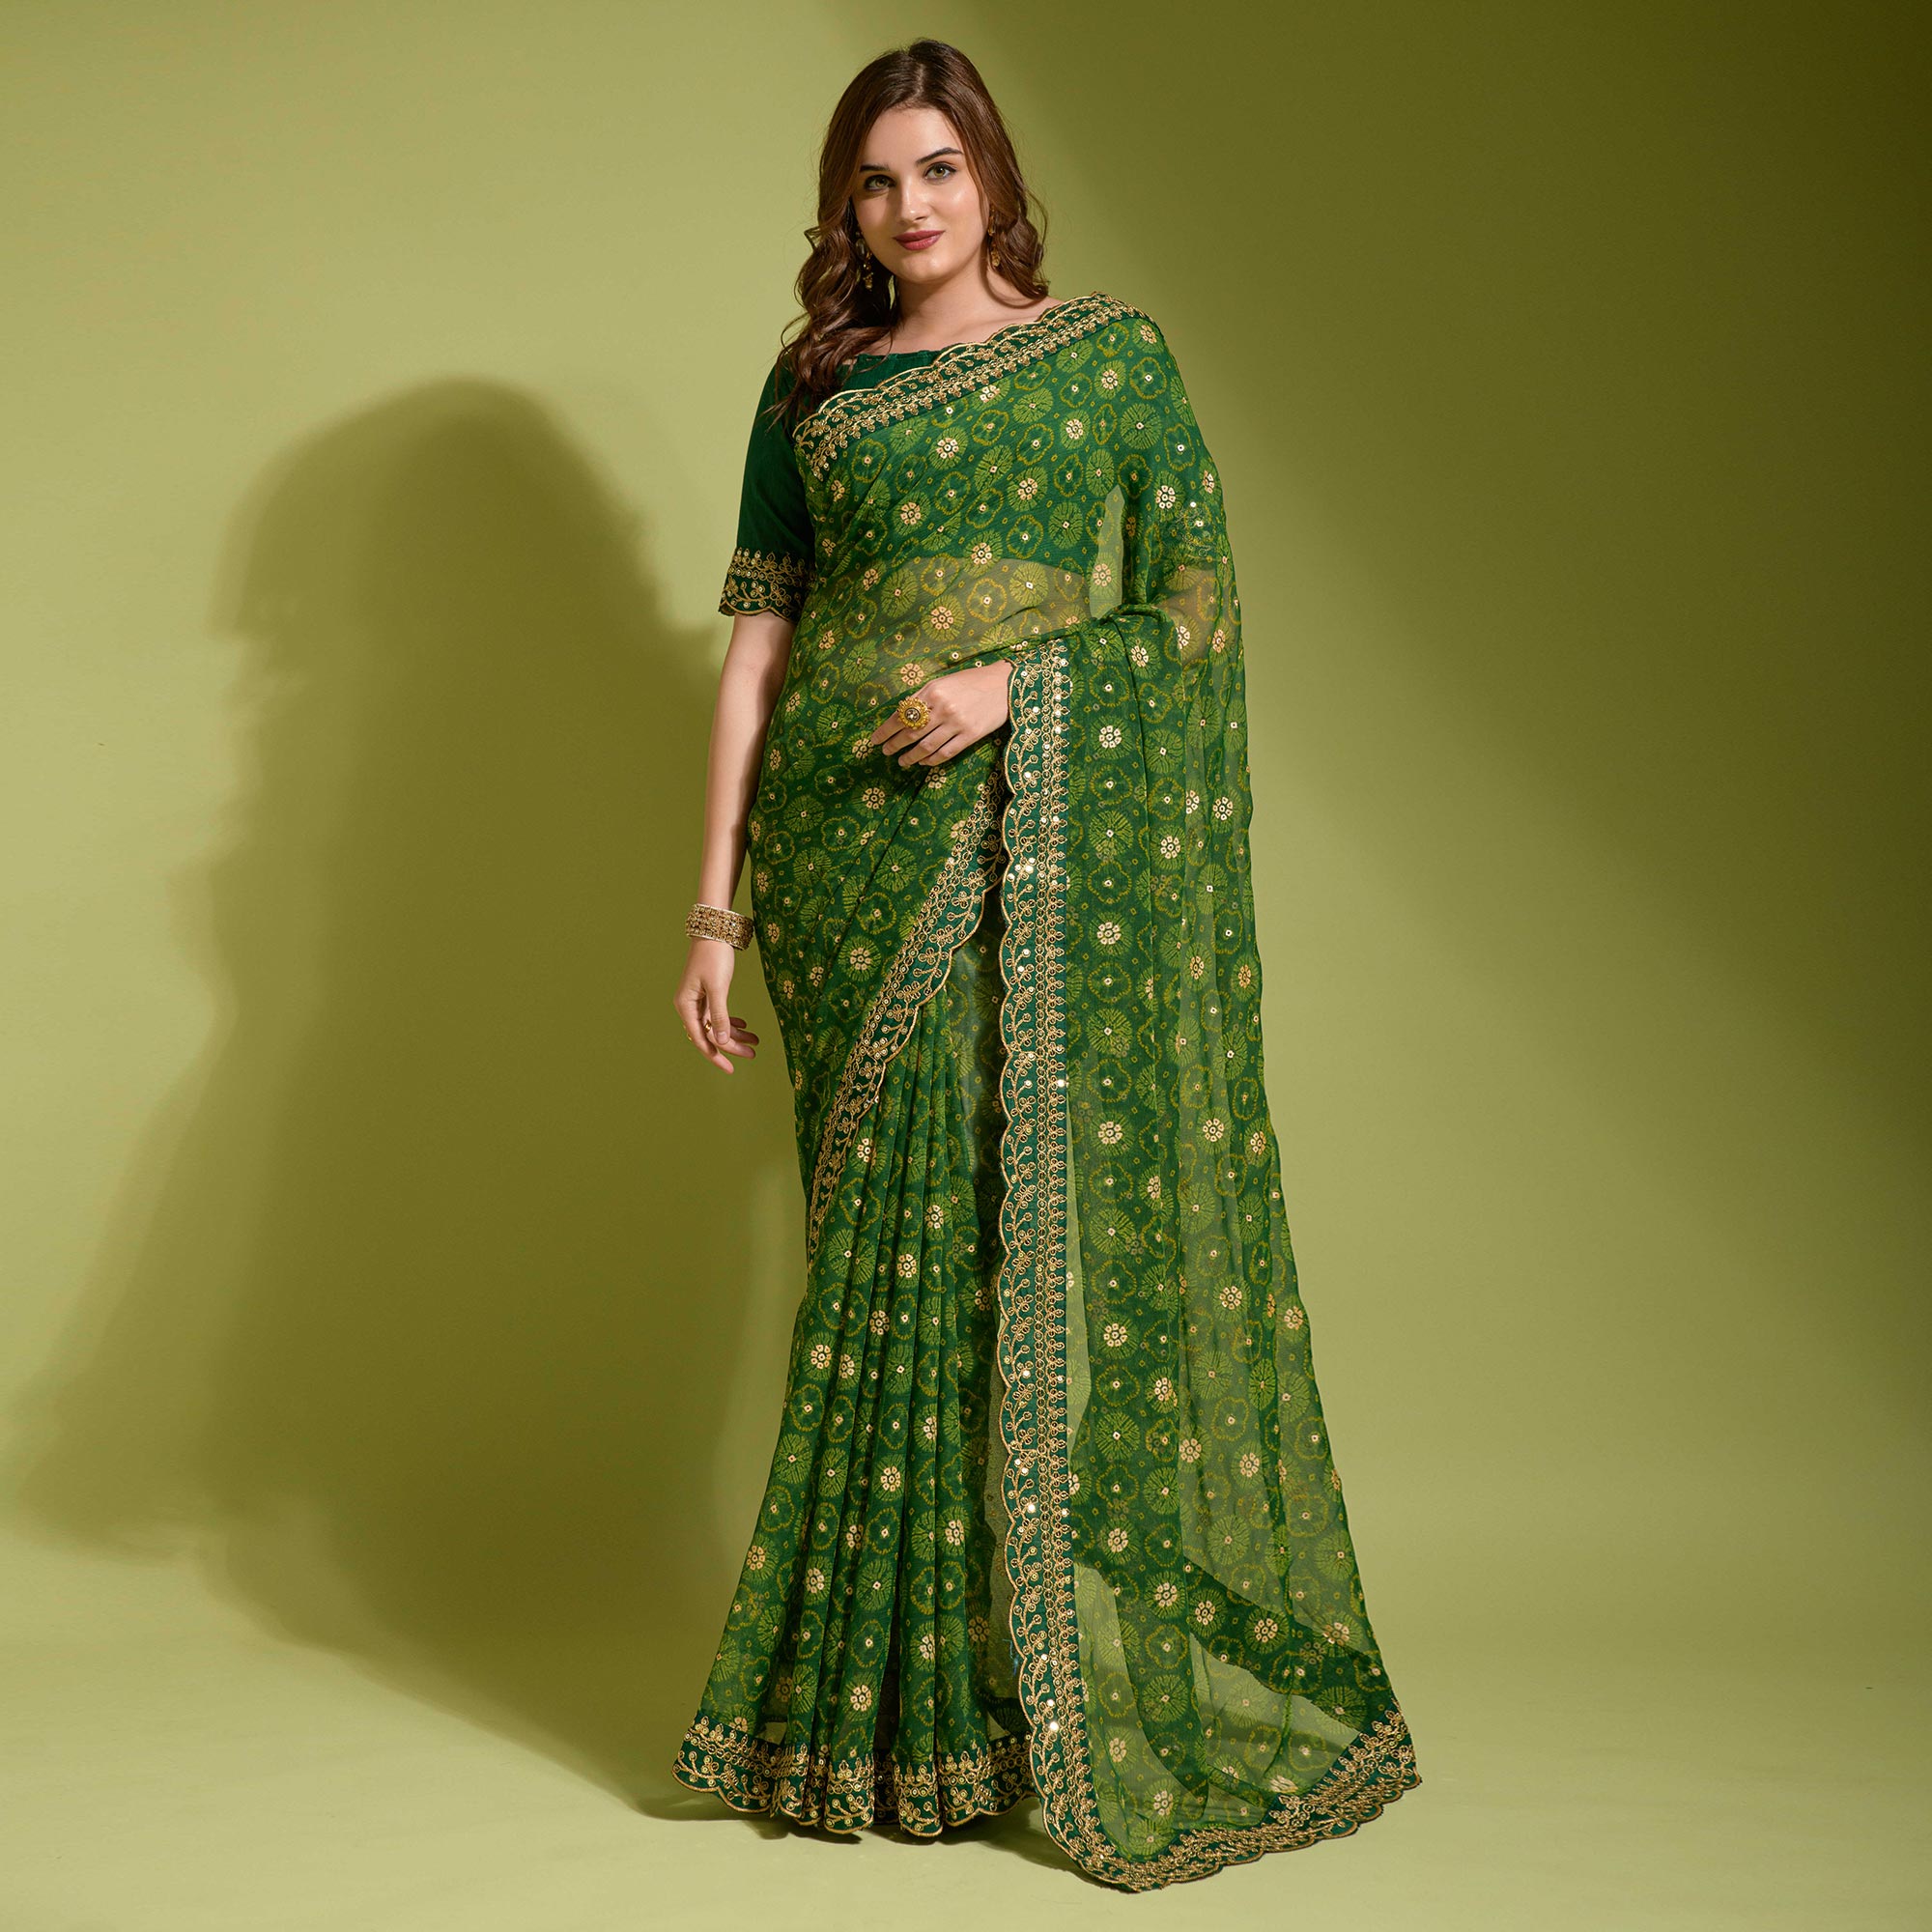 Green Bandhani Foil Printed Georgette Saree With Embroidered Border